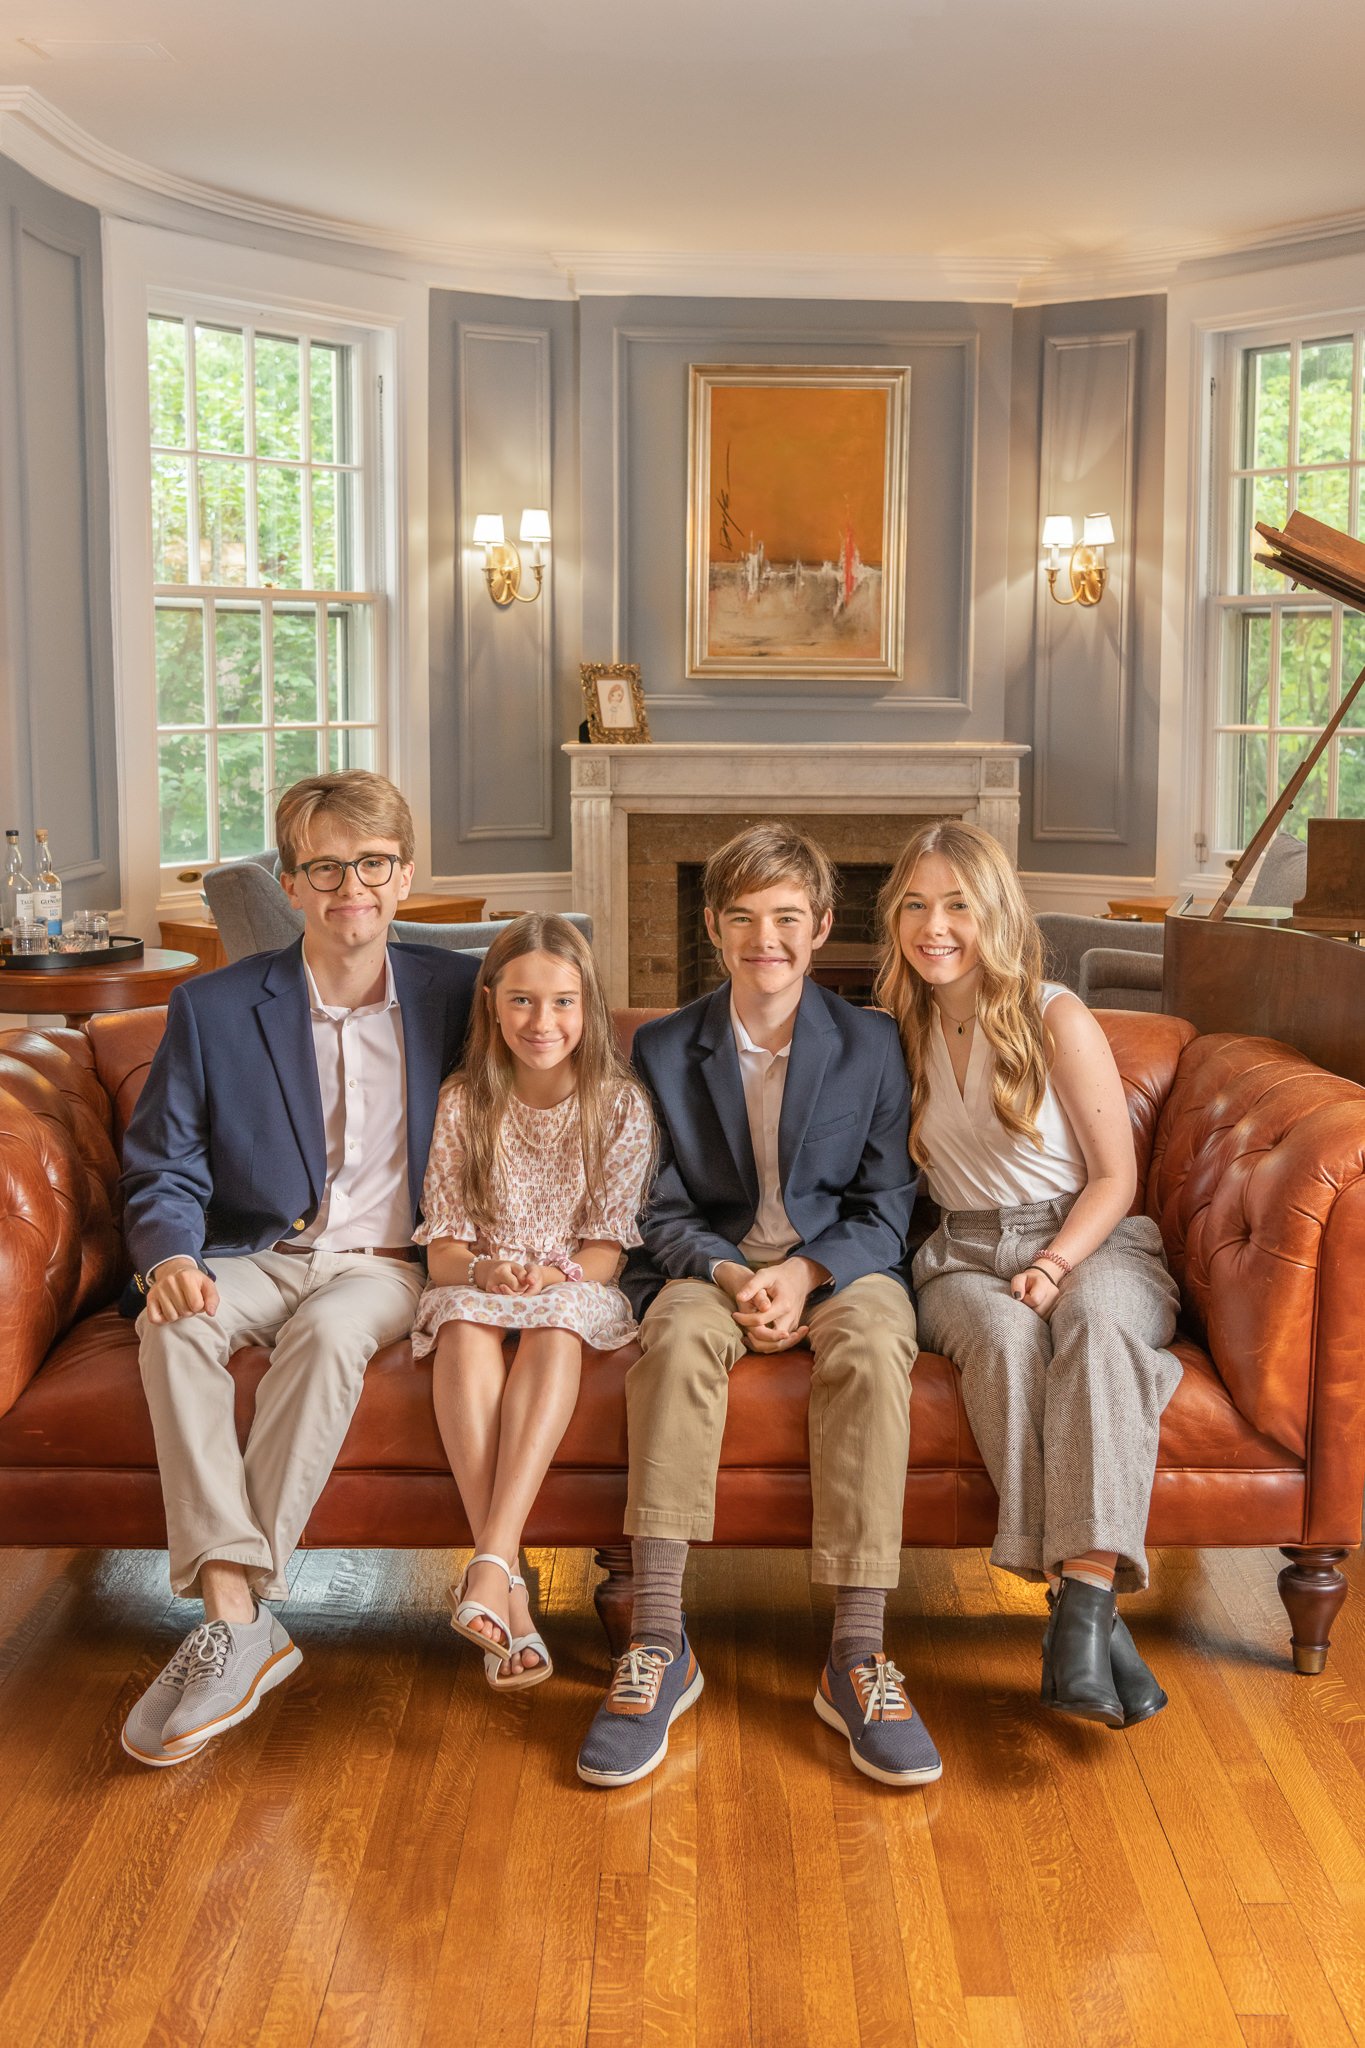  A family portrait was taken in a colonial home in Summit, NJ by Nicole Hawkins Photography with four siblings. professional family pics #NicoleHawkinsPhotography #NicoleHawkinsFamilyPortrait #NicoleHawkinsSenior #NJPortraits #siblingportrait 